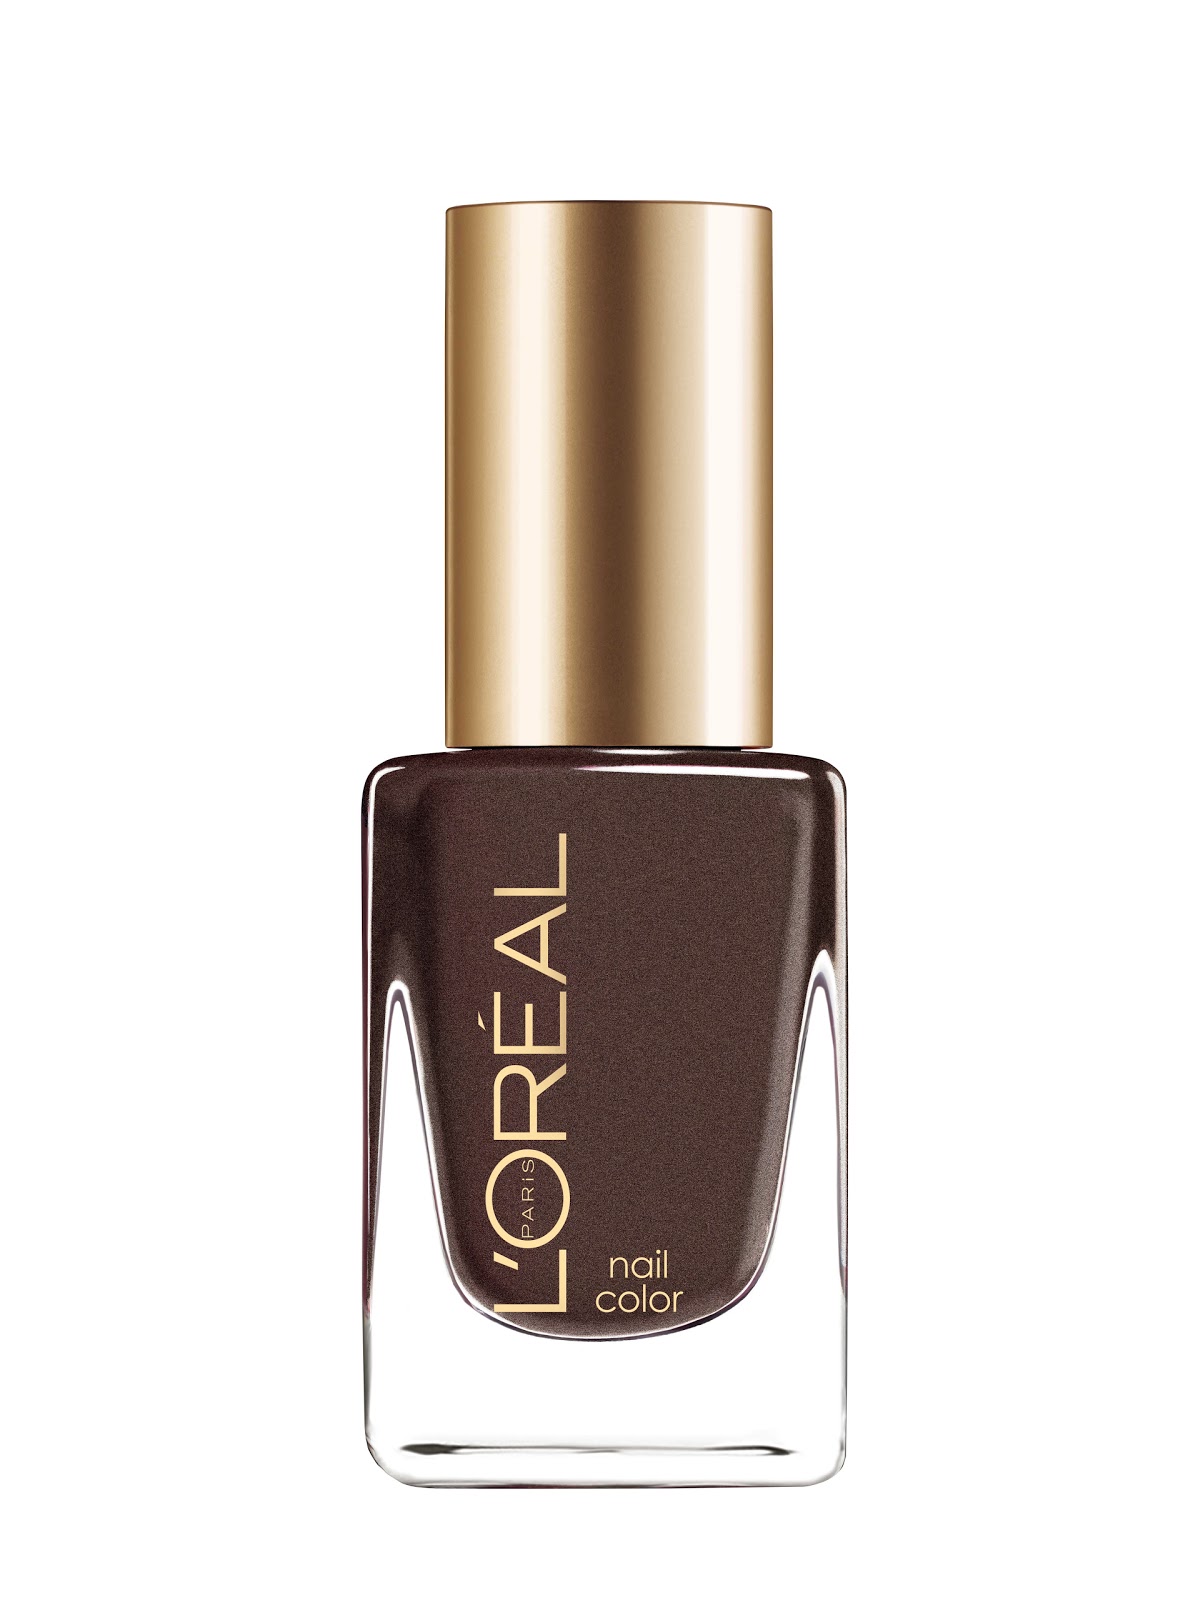 Beauty By Benz: Benz On A Budget: new fall nail colors from L'Oreal Paris